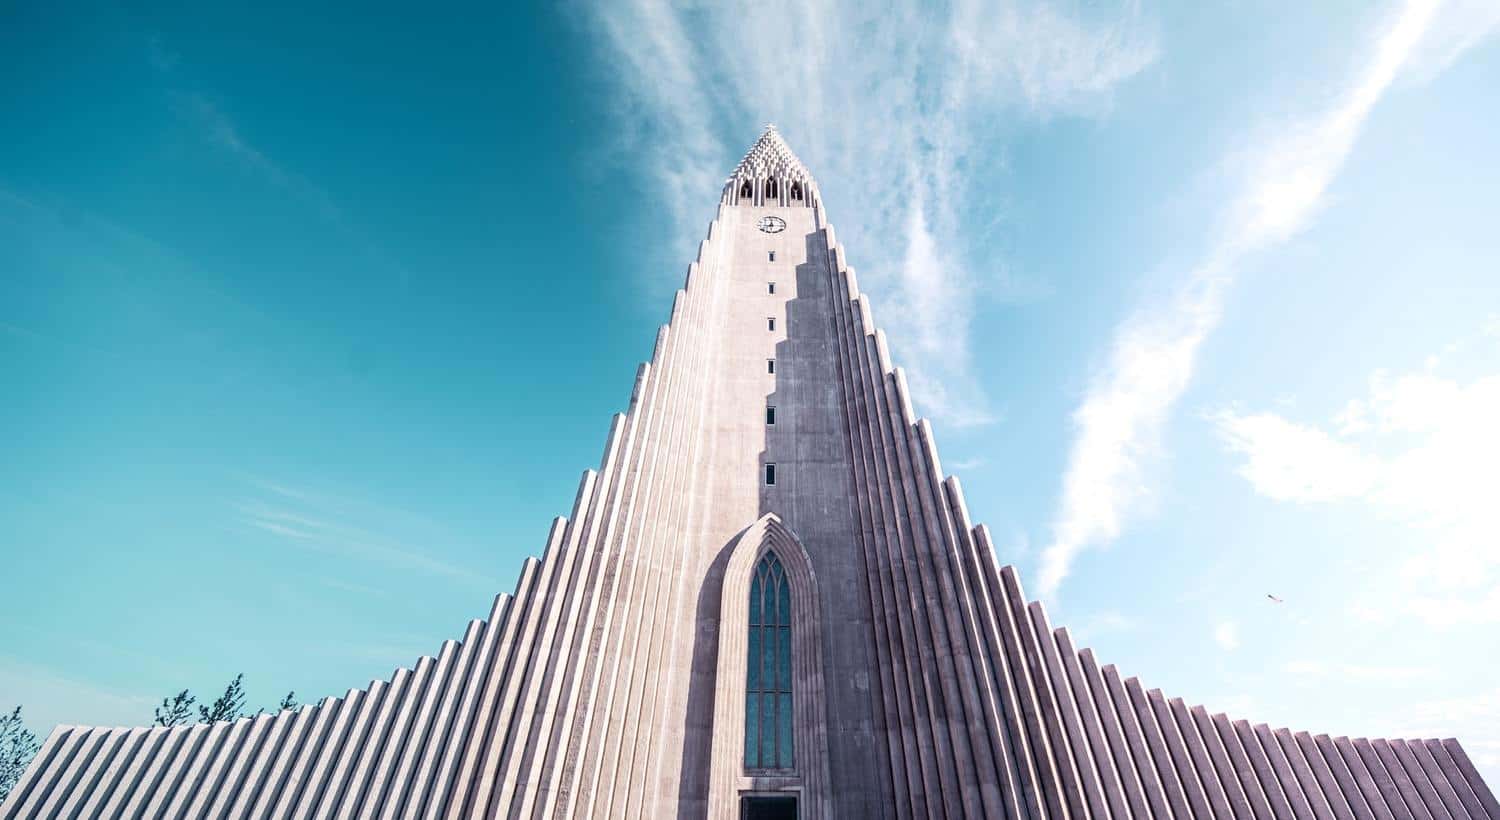 A dramatic stepped concrete church in Iceland, raising up to a steeple at the top.